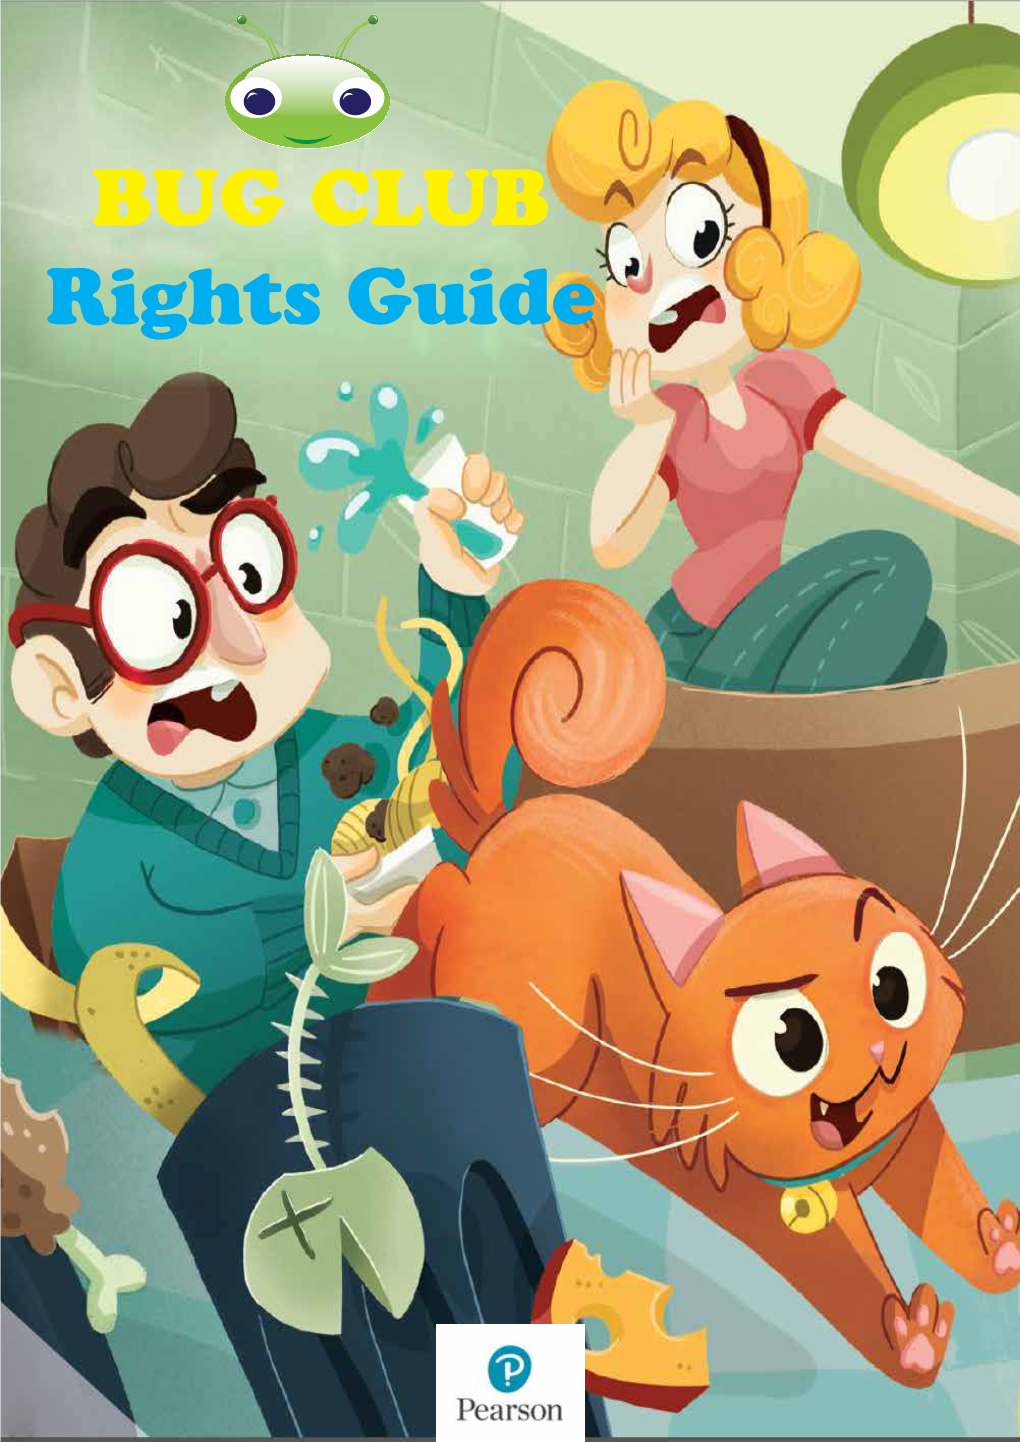 BUG CLUB Rights Guide